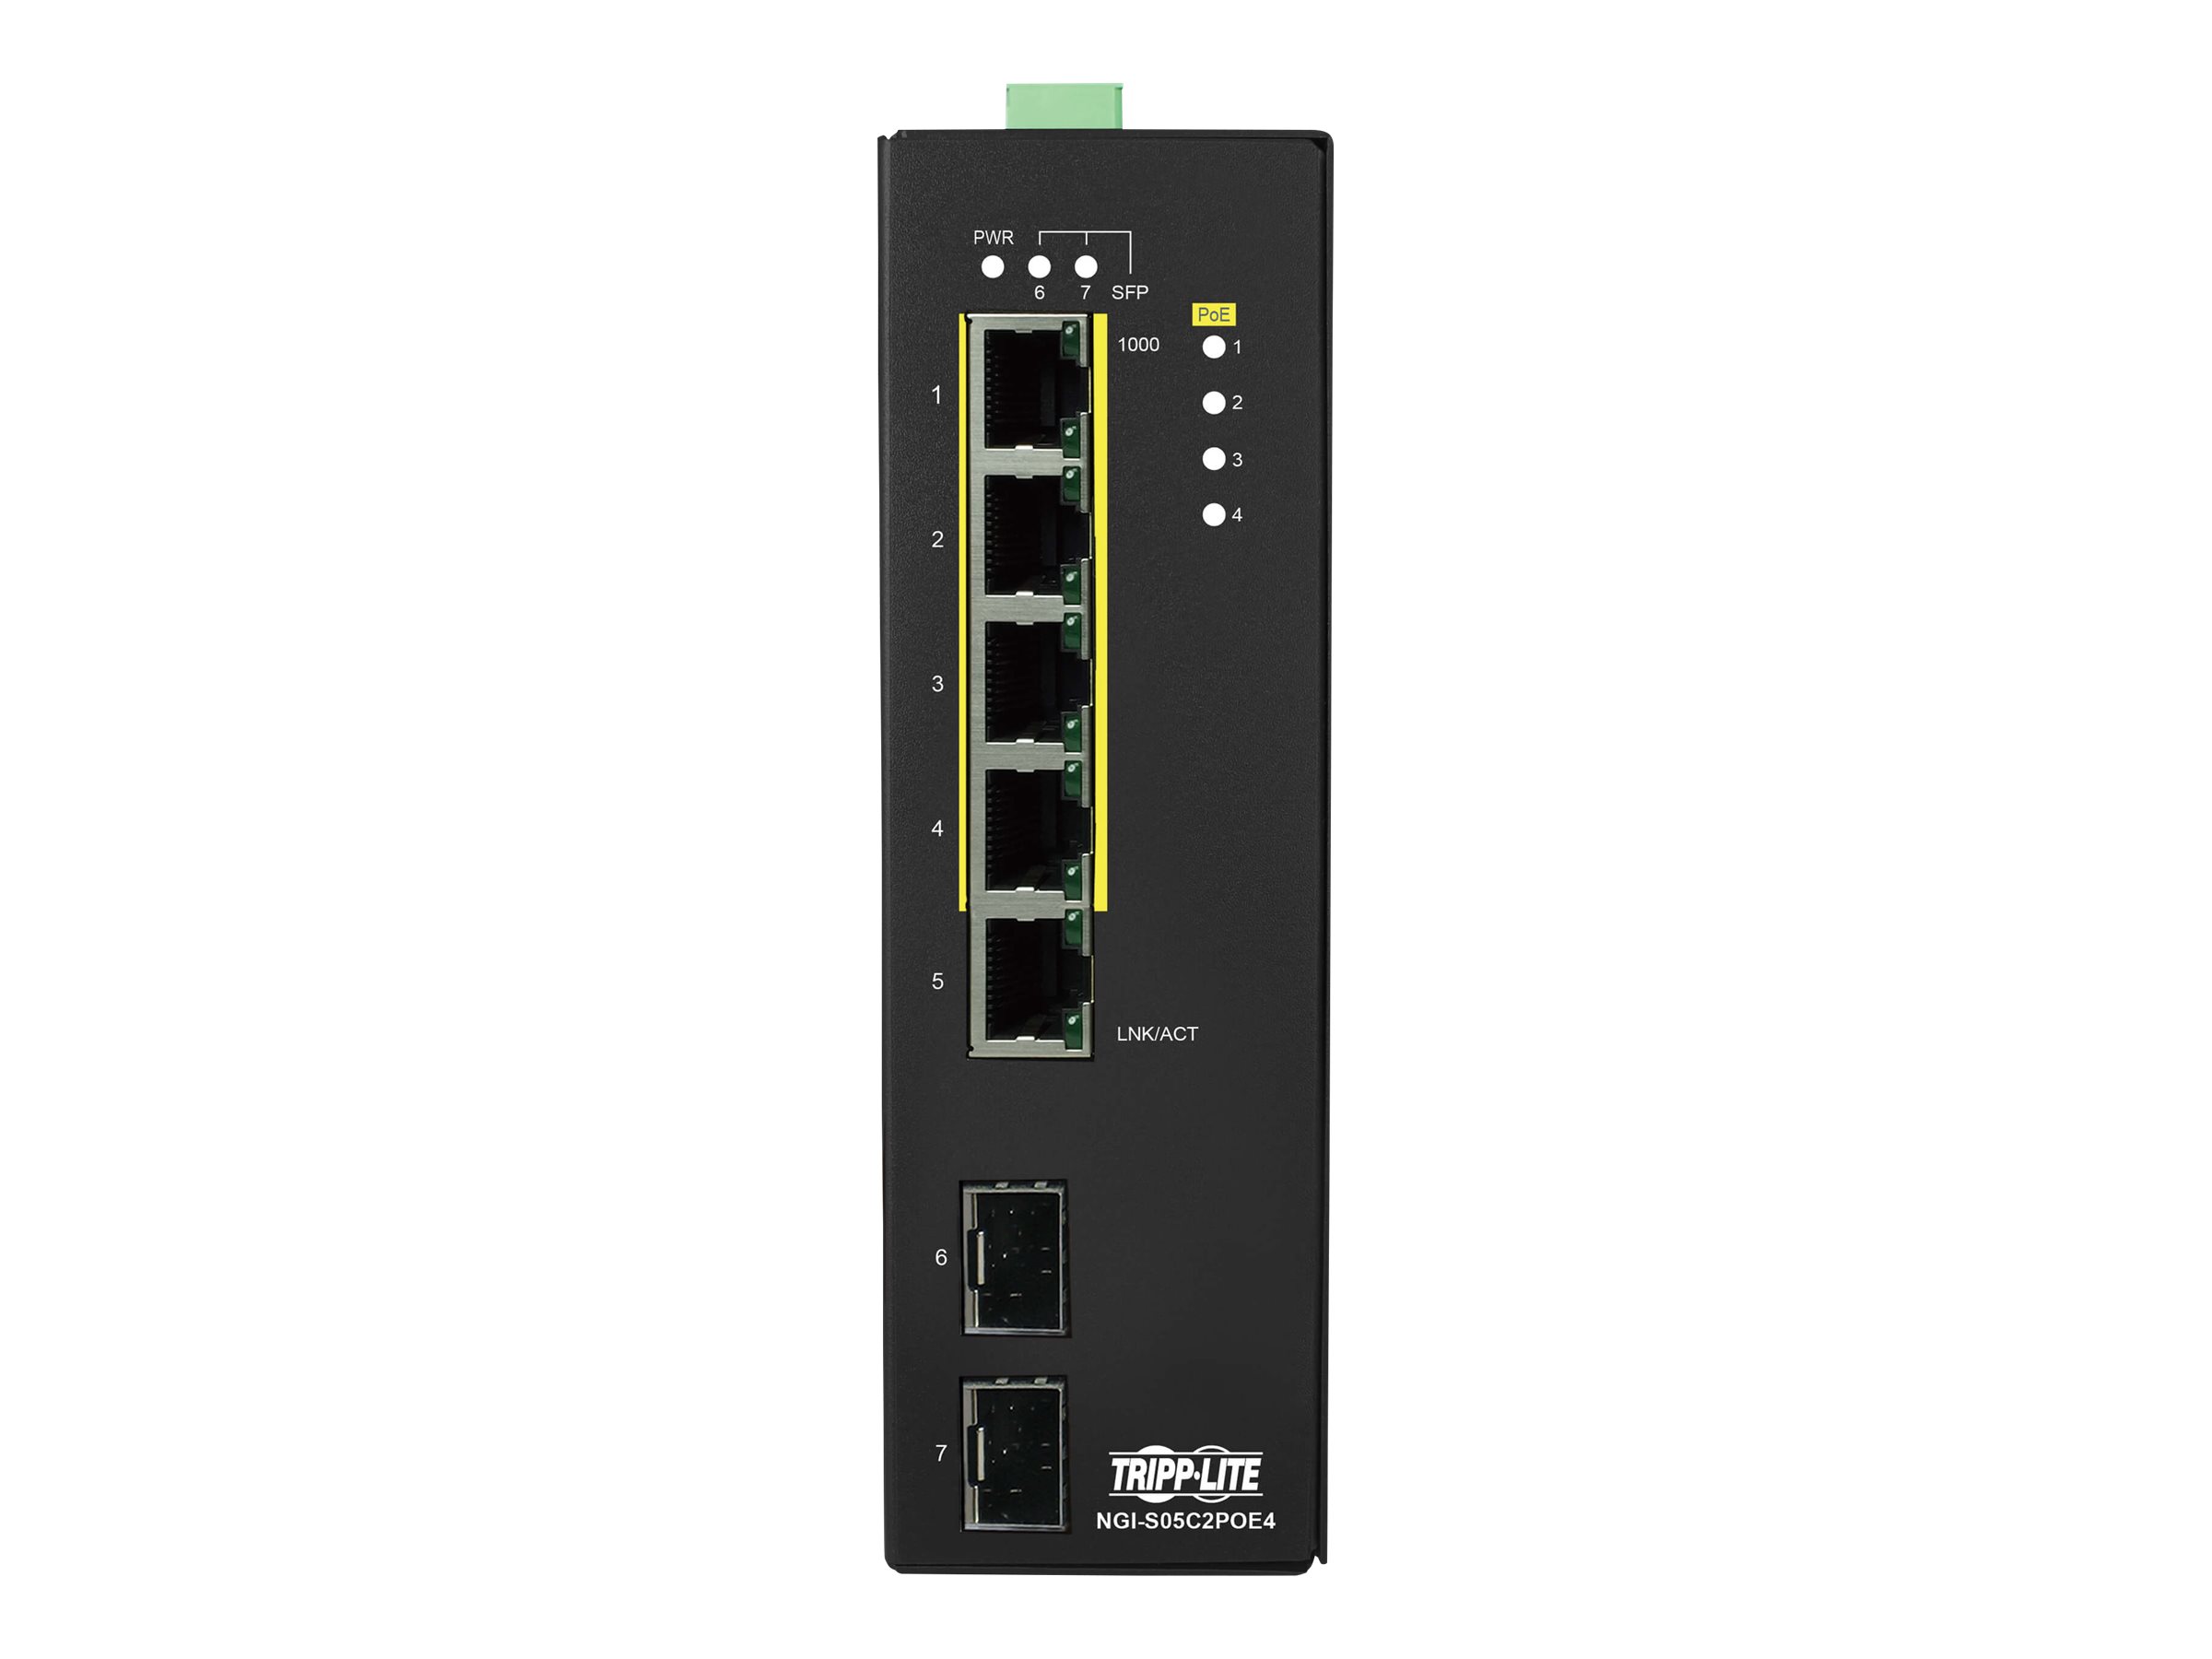 Tripp Lite 5-Port Lite Managed Industrial Gigabit Ethernet Switch - 10/100/1000 Mbps, PoE+ 30W, 2 GbE SFP Slots, -10 to 60C, D